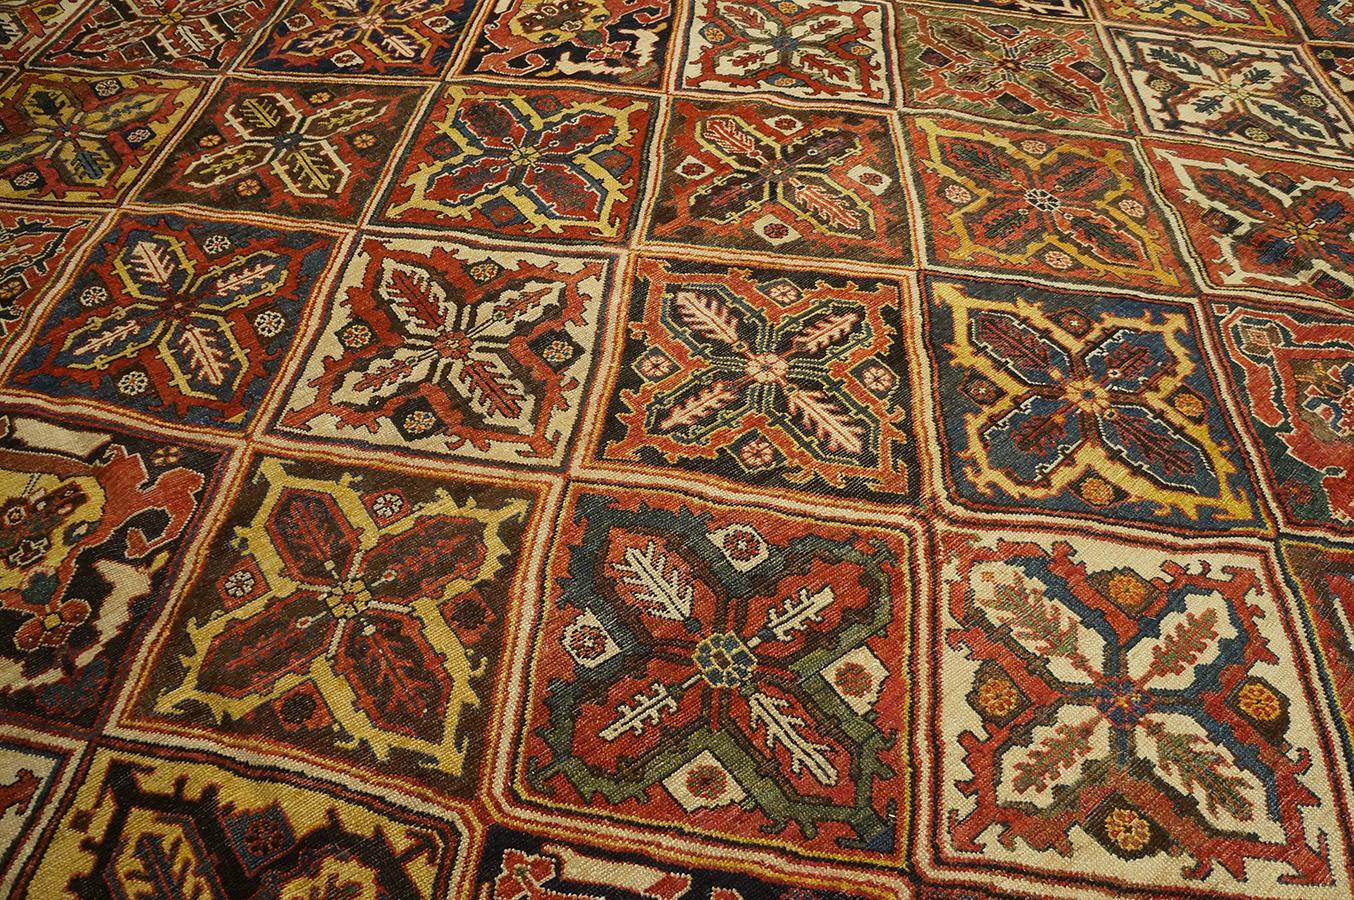 Hand-Knotted Early 20th Century S. Persian Bakhtiari Carpet ( 16'6